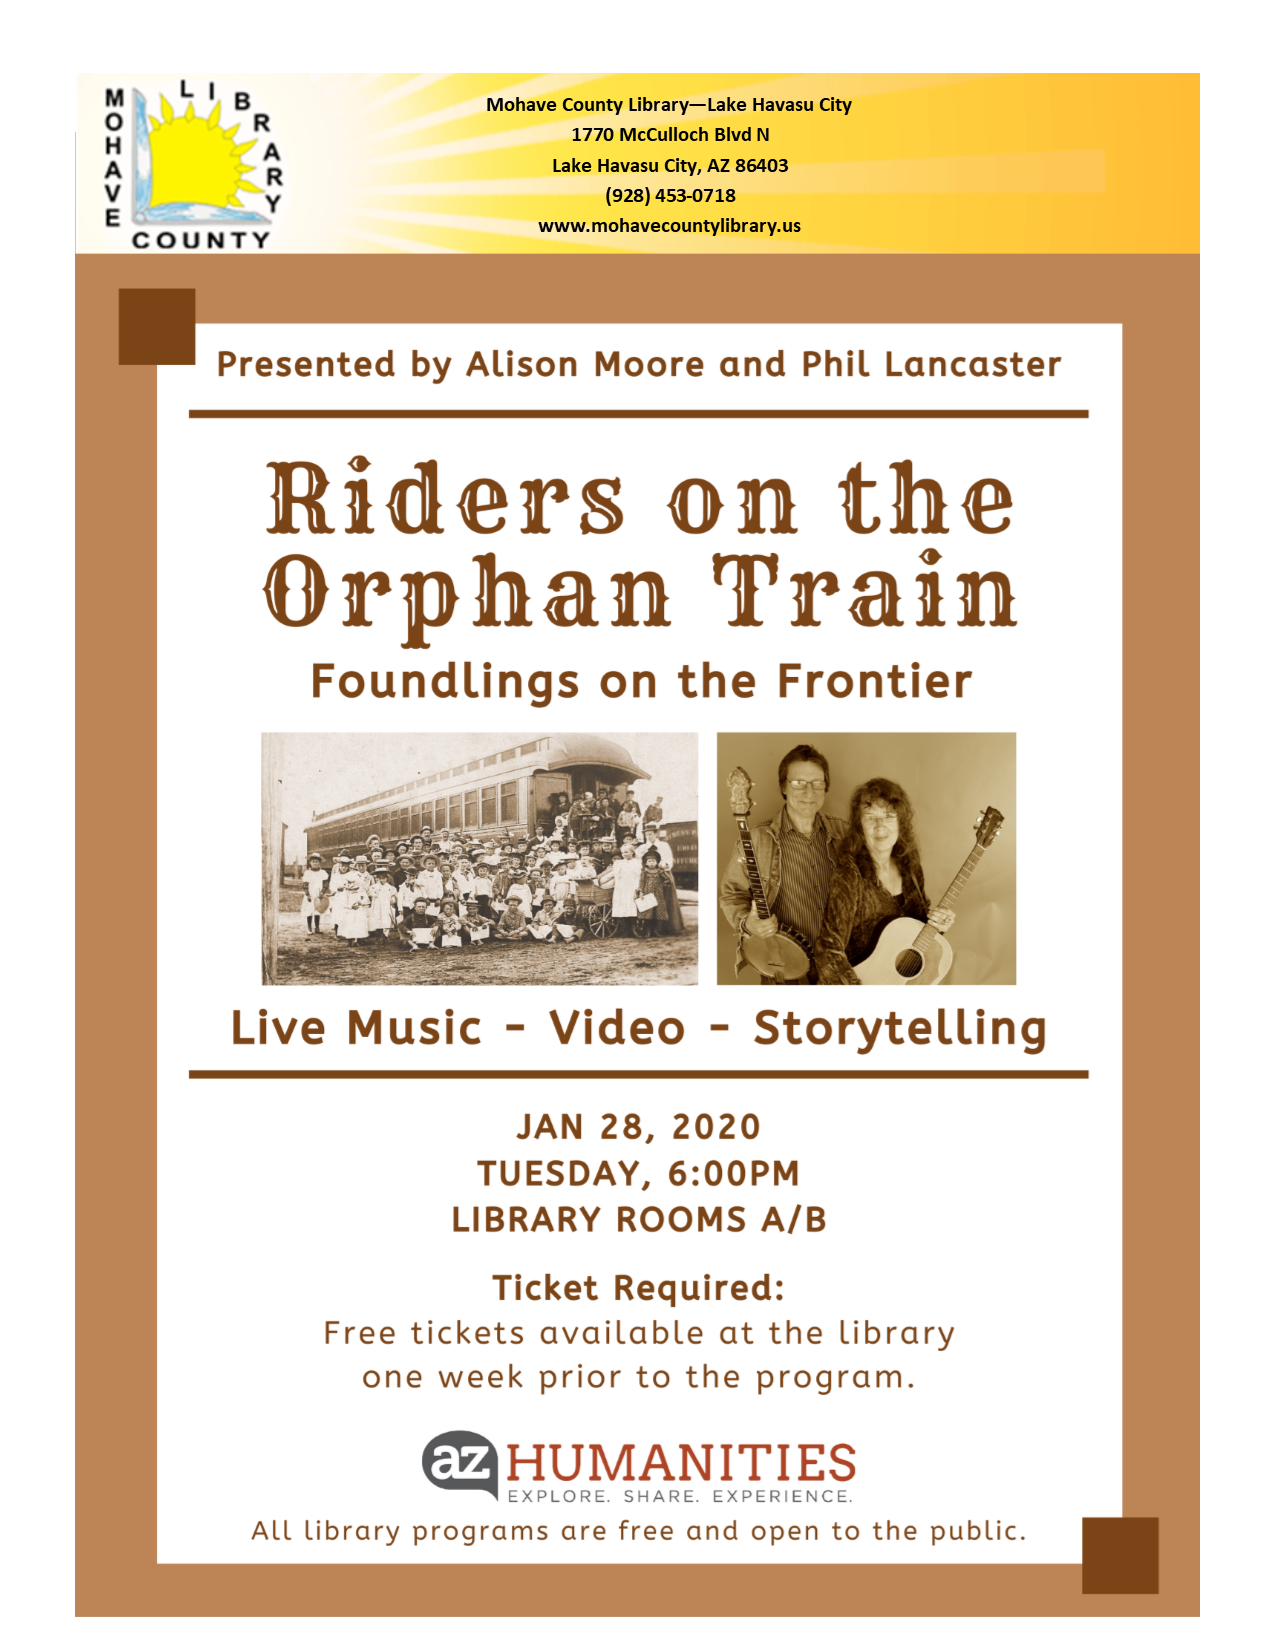 Riders on the Orphan Train Foundlings on the Frontier